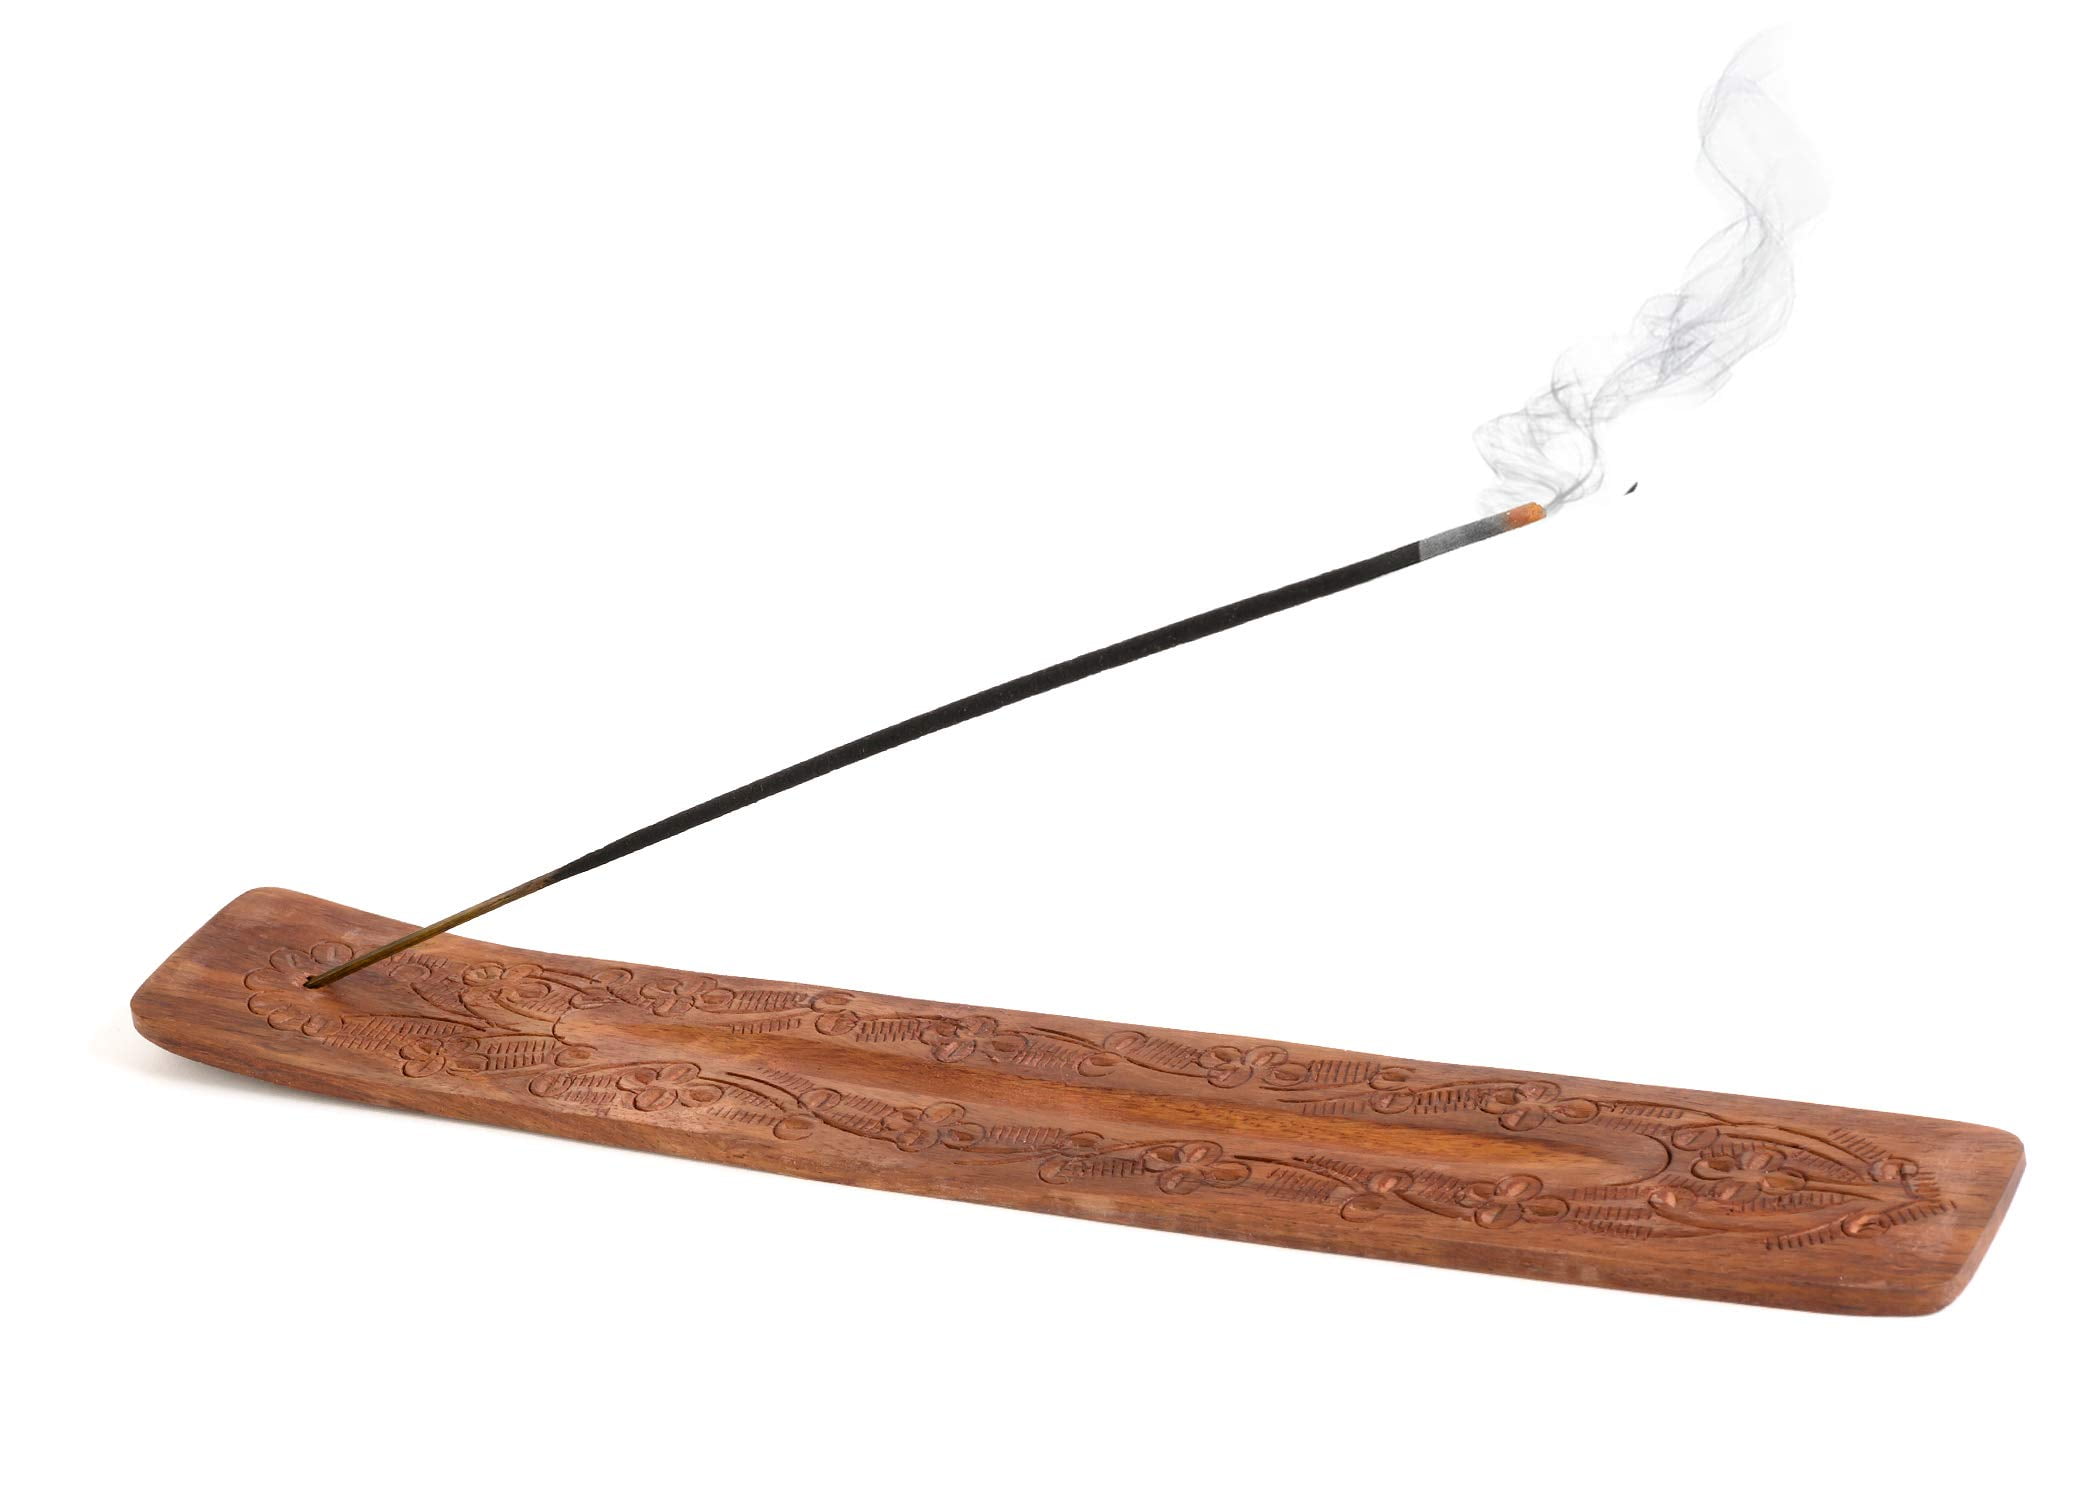 The Retailers Wooden Incense Stick Holder Incense Burner Ash Catcher With Free 10 Naavya Incense Sticks by EASY 4 SAVE 